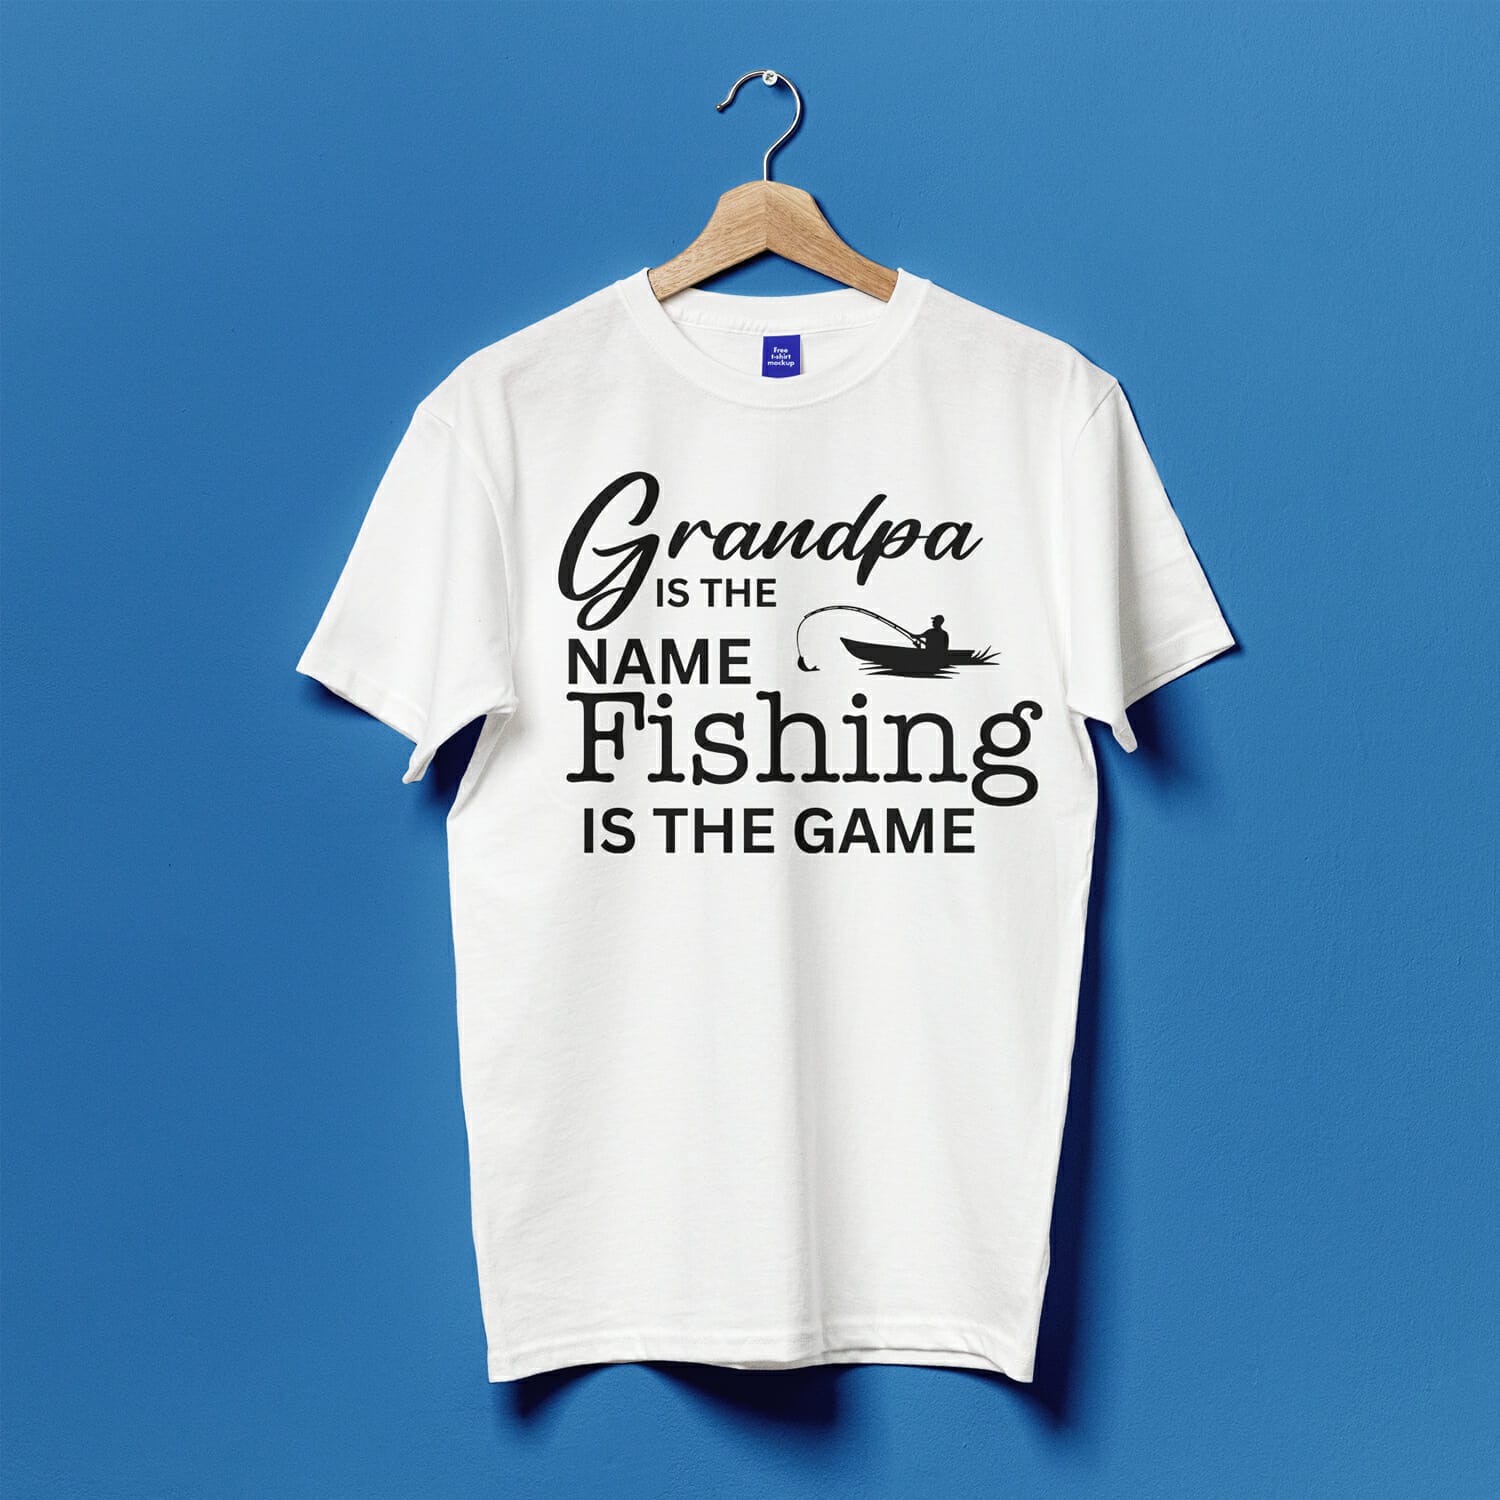 Grandpa is the name Fishing is the game funny T-shirt design